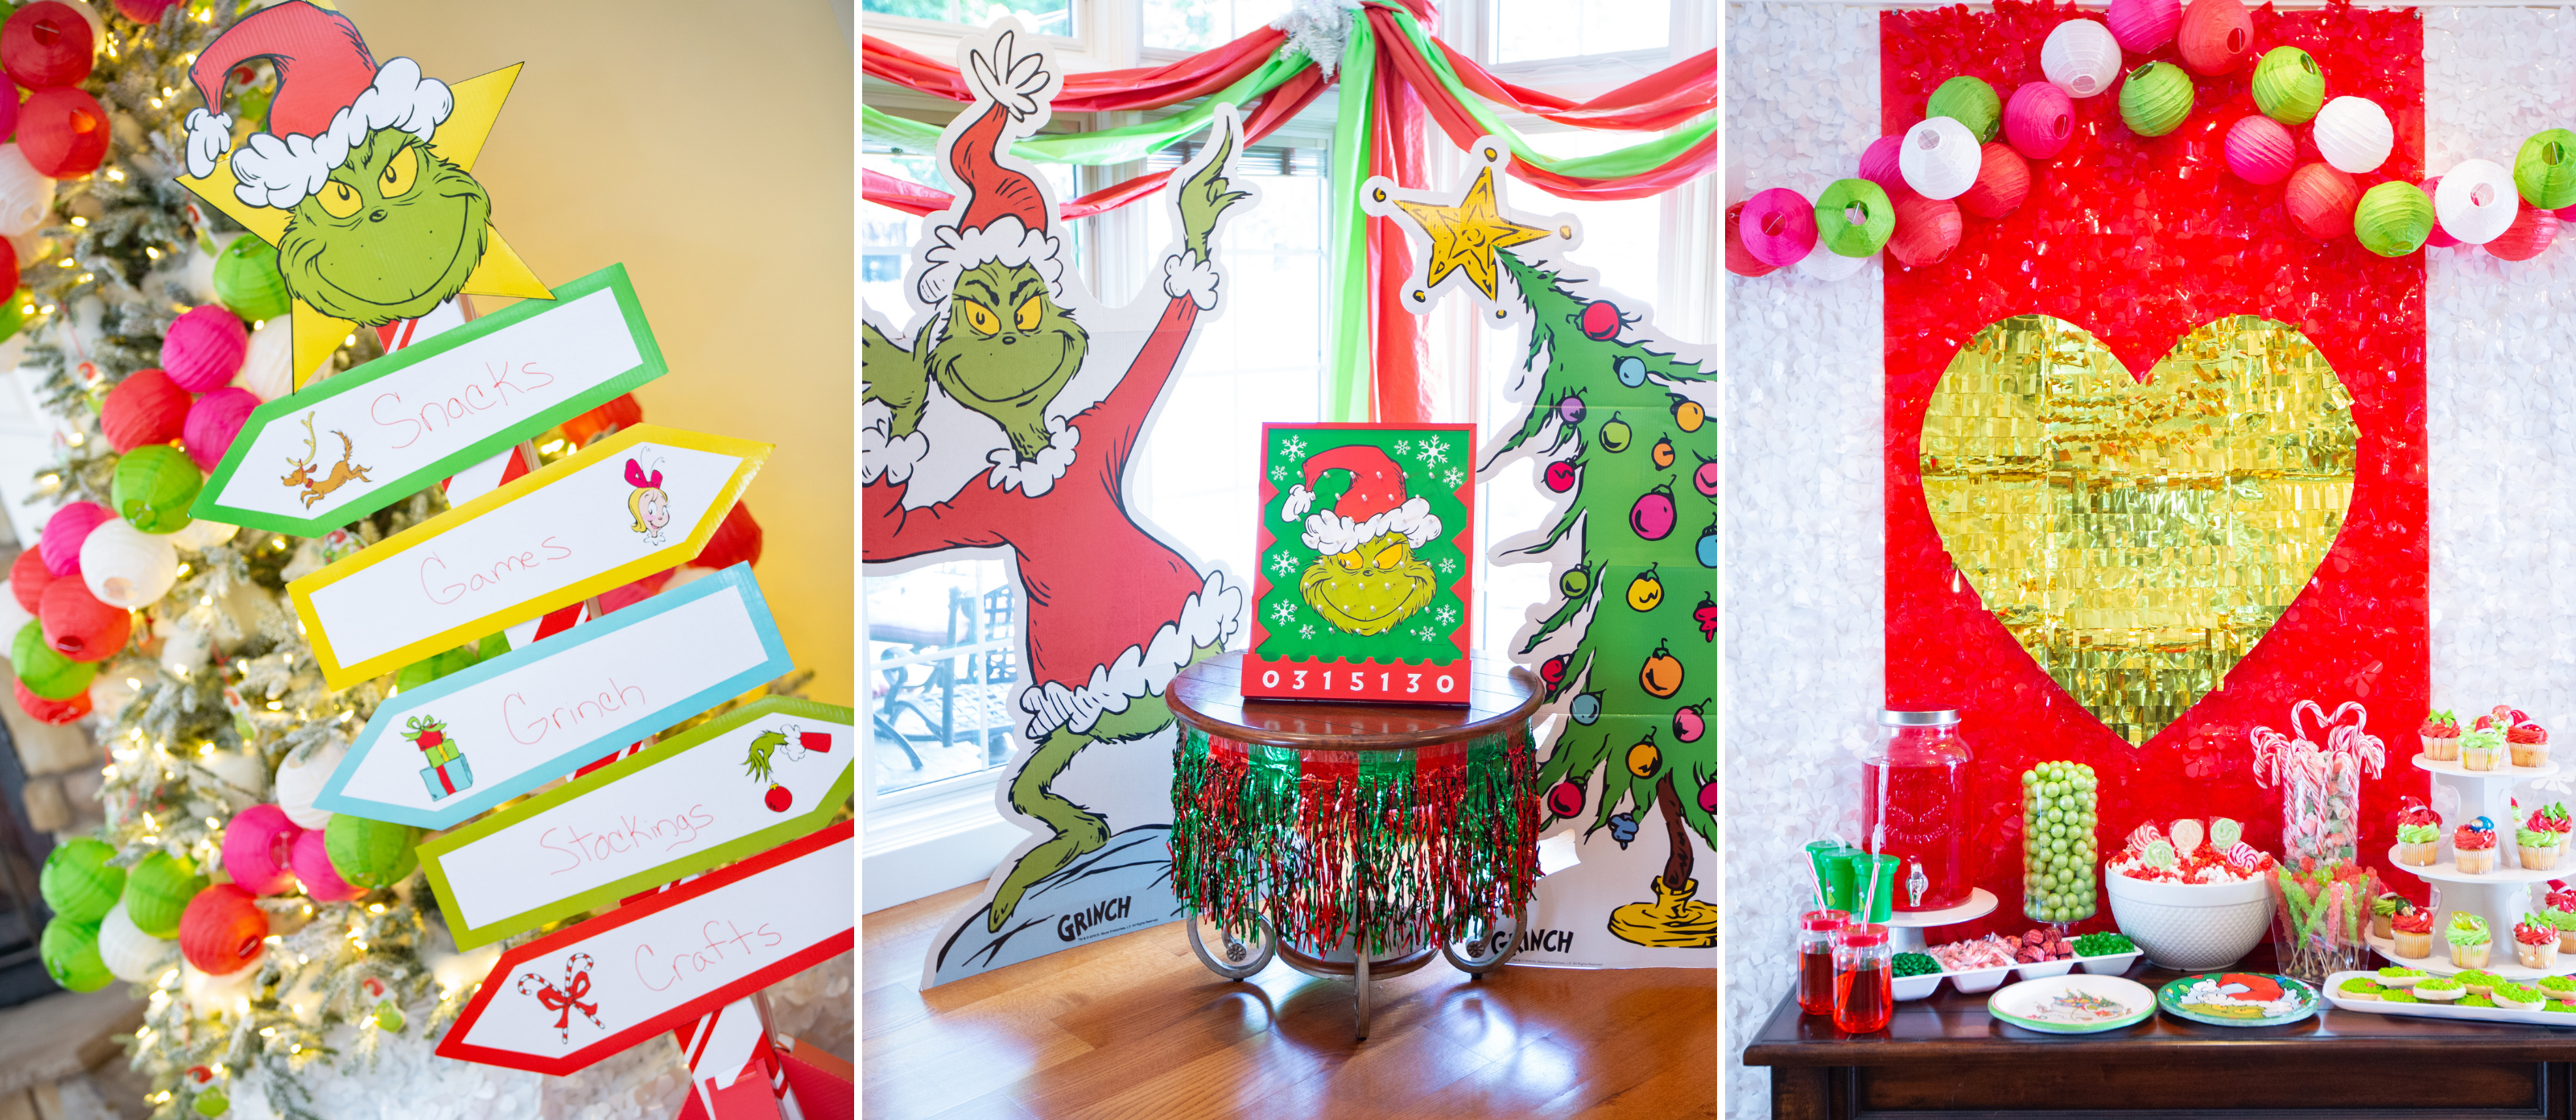 Drink Up Grinches Banner Grinch Sign - Grinch Birthday Party Decorations -  Whoville Grinch Christmas Party Decorations - Drink Up Grinches Decorations